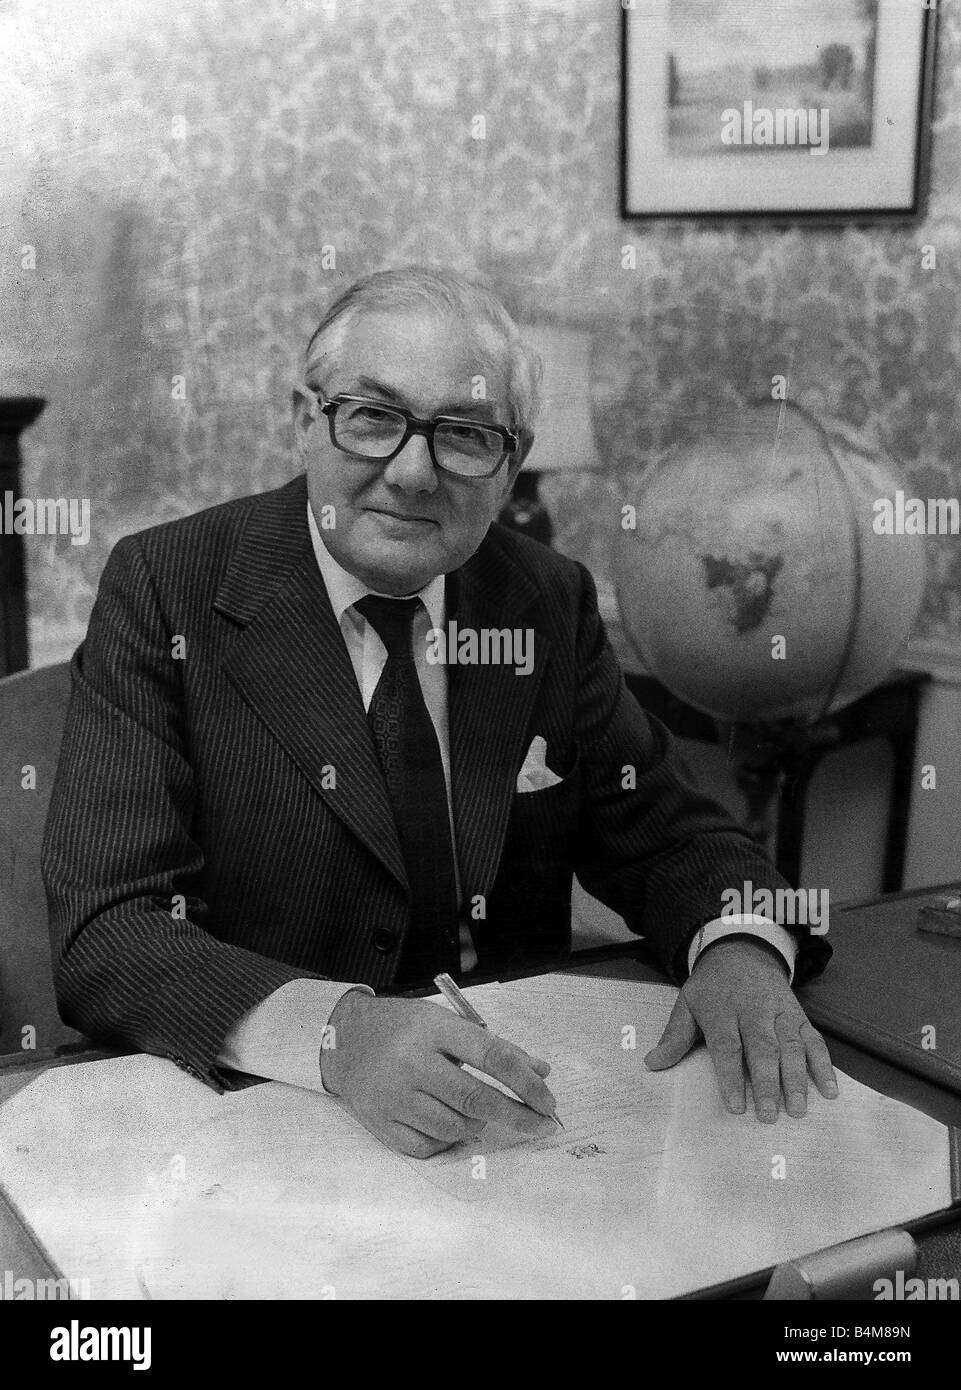 James Callaghan Labour Leader Prime Minister pictured at desk Stock Photo